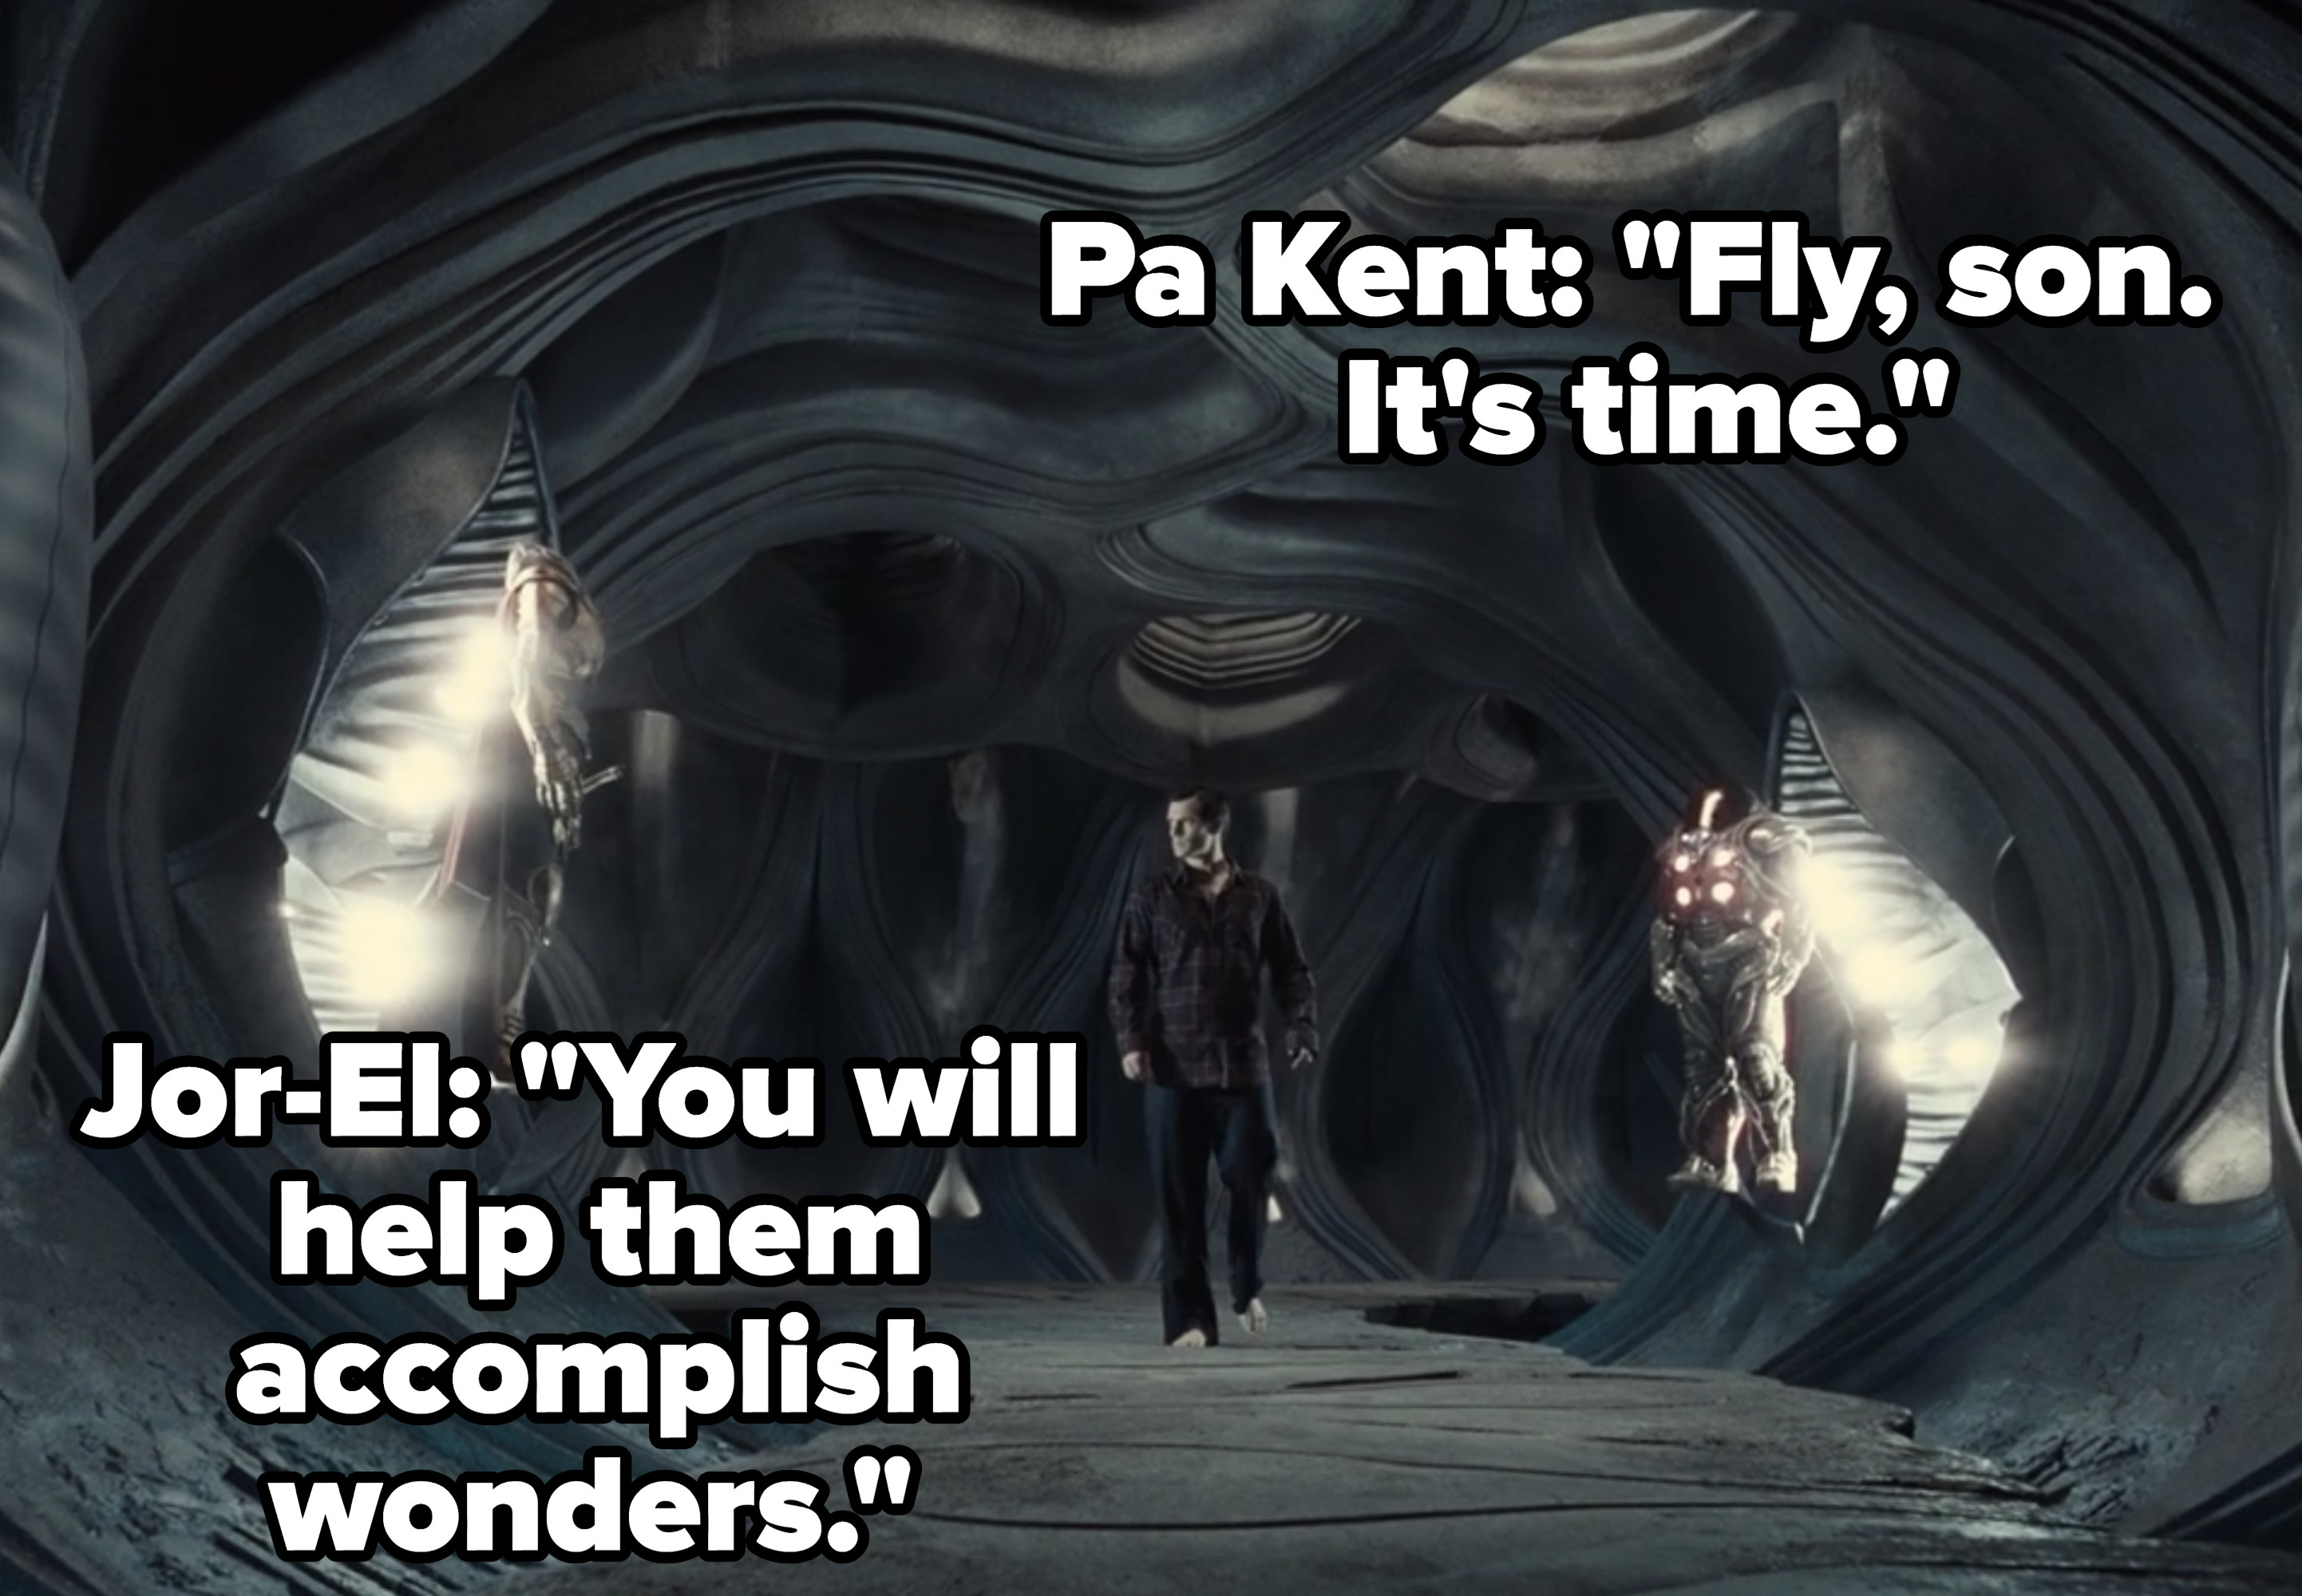 Pa Kent says, &quot;Fly, son. It&#x27;s time.&quot; and Jor-El says, &quot;You will help them accomplish wonders.&quot;